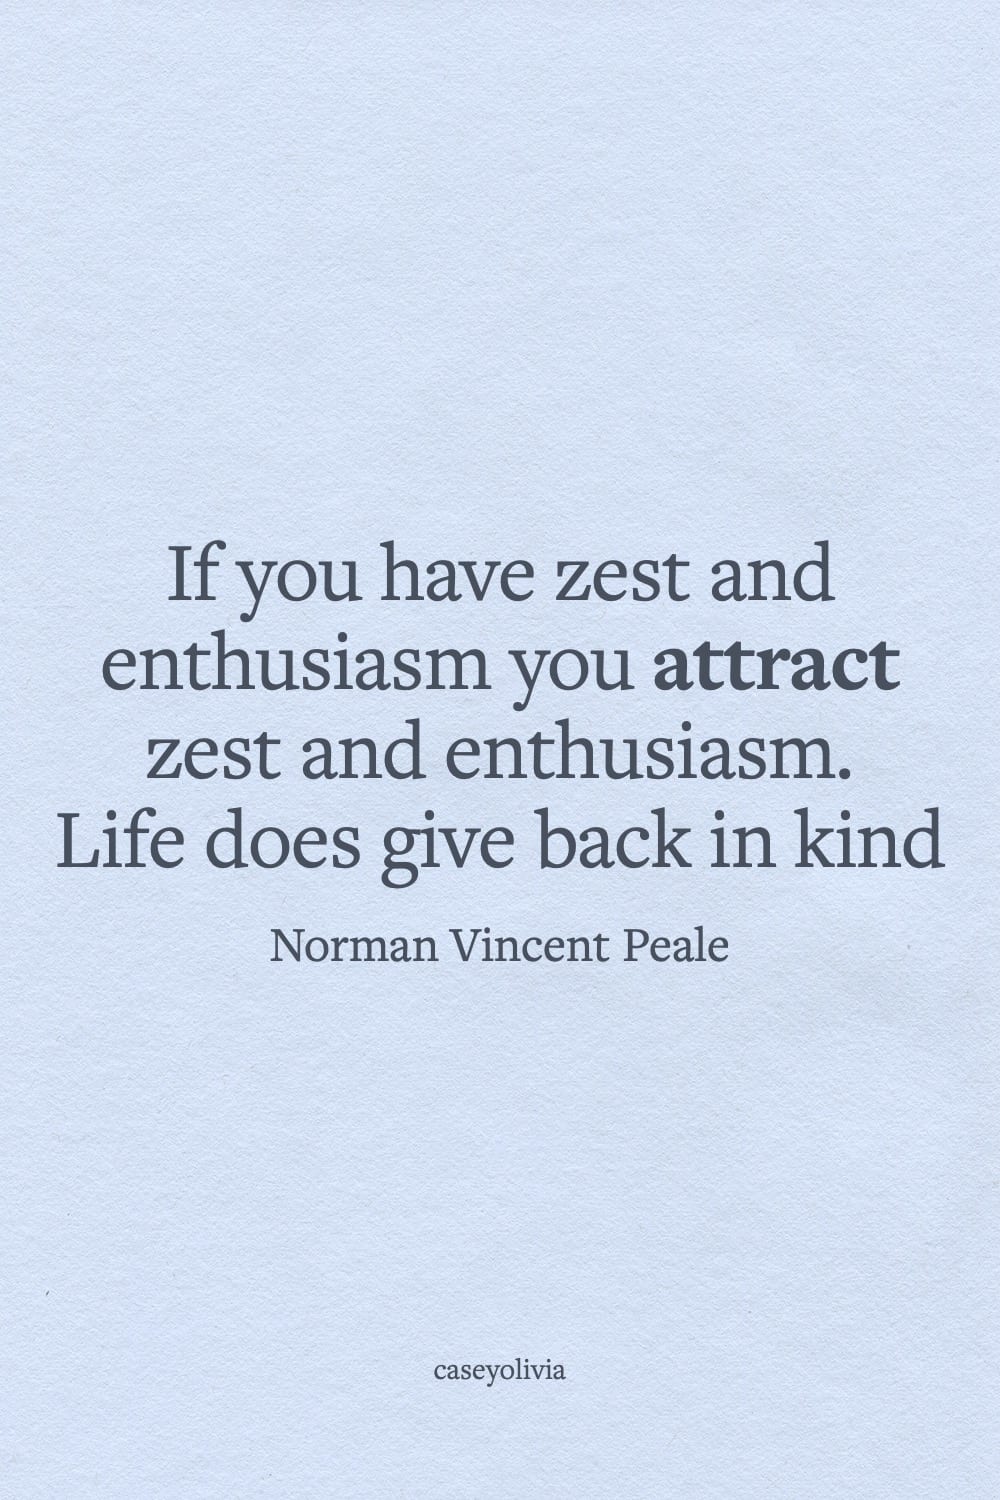 norman vincent peale life does give back in kind